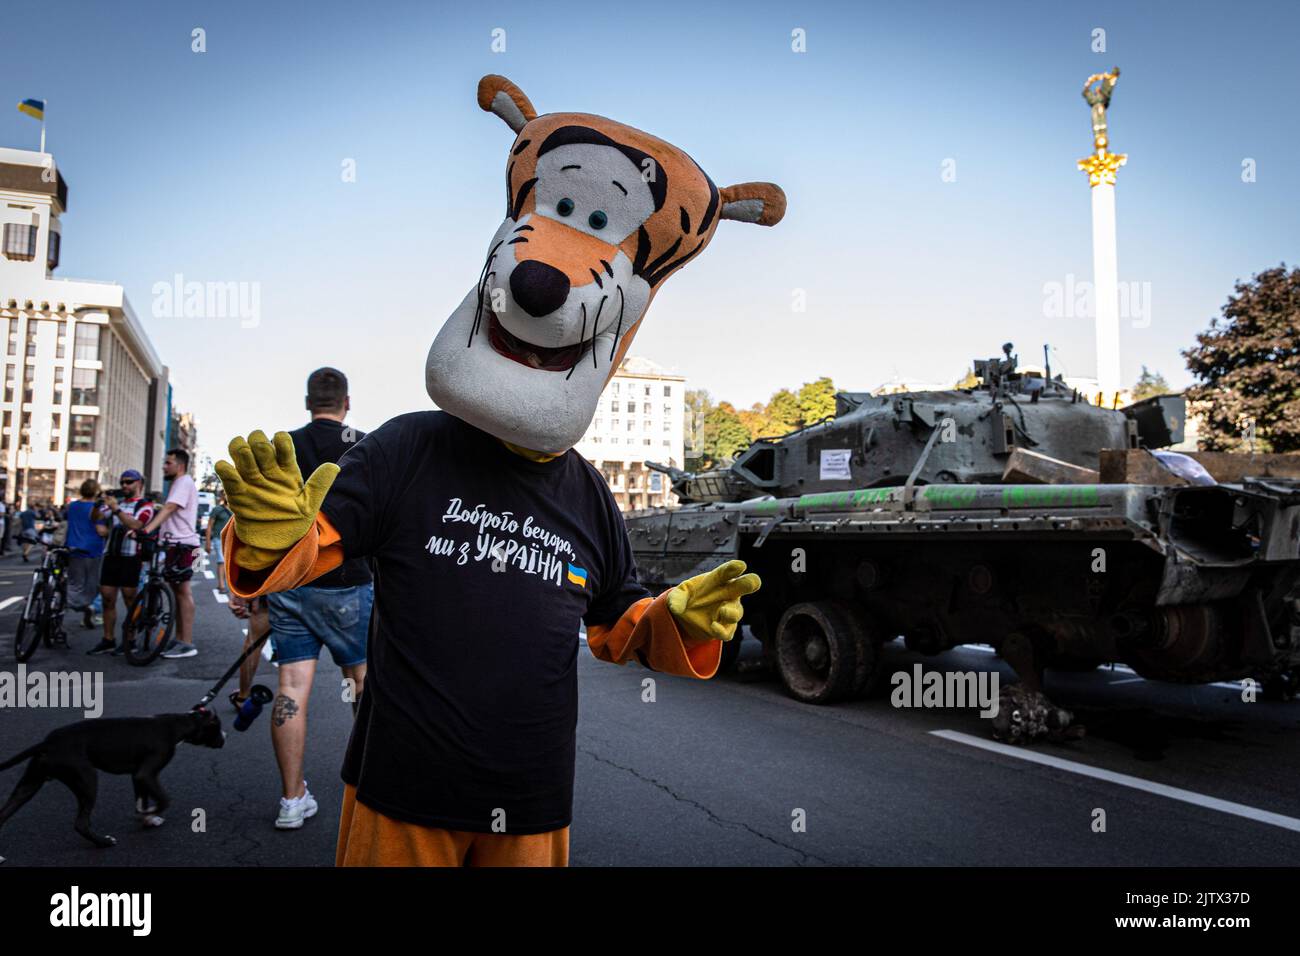 Kyiv, Ukraine. 24th Aug, 2022. A man dressed up like the cartoon character ''Tigger'' seen on the streets in Kyiv, Ukraine, as people flock to see the demolished Russian tanks on the streets. Amid the Independence Day of Ukraine, and nearly 6 months after the full-scale invasion of Ukraine on February 24, the country's capital Kyiv holds an exhibition on the main street of Khreschaytk Street showing multiple destroyed military equipment, tanks and weapons from The Armed Forces of The Russian Federation (AFRF). During the Independence Day of Ukraine and nearly 6 months after the full-scale inv Stock Photo